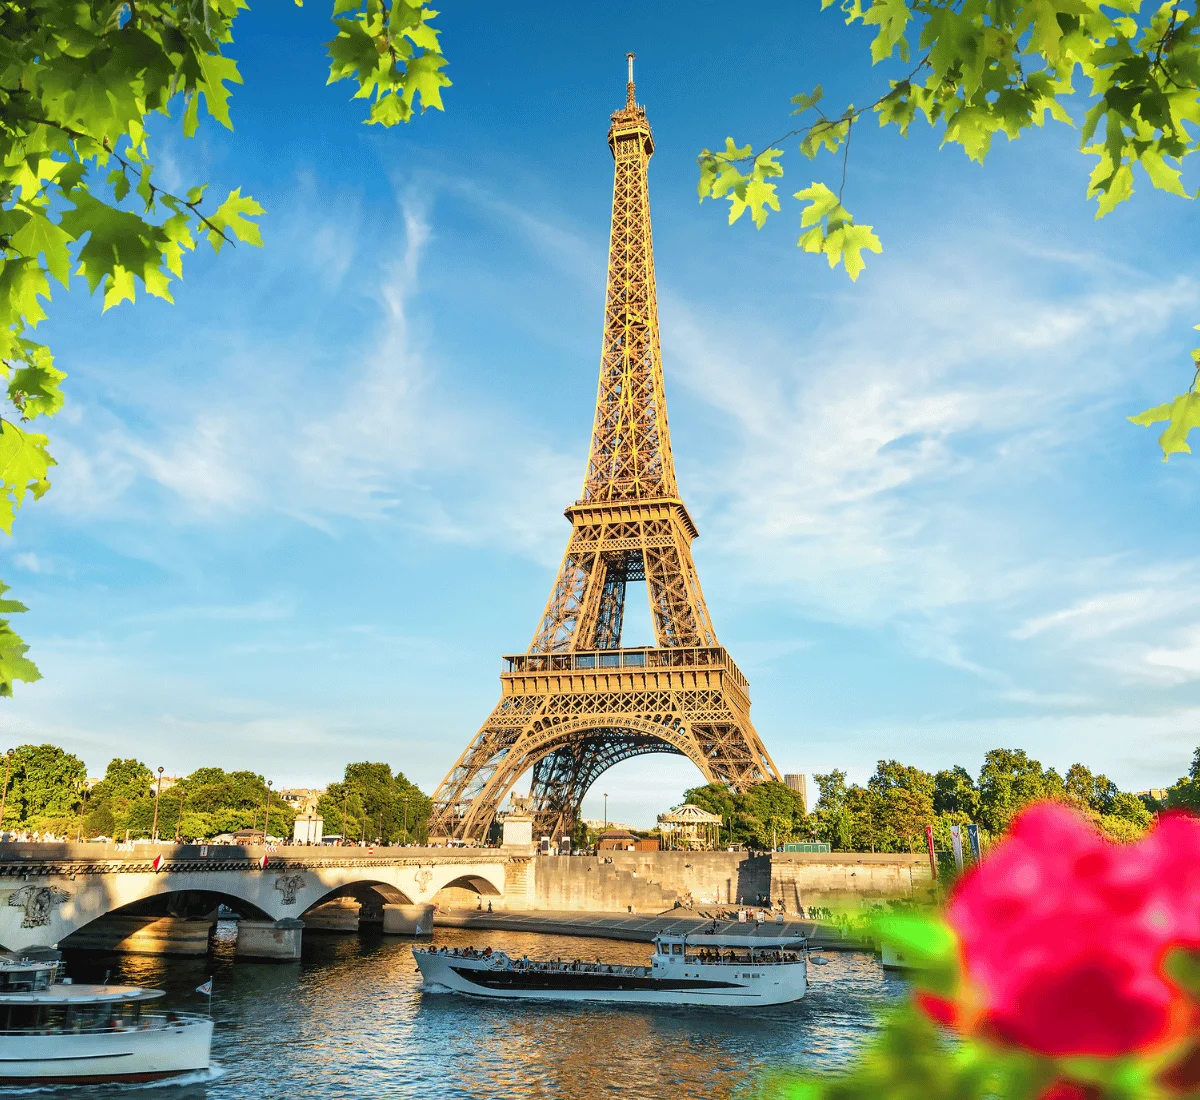 The Eiffel Tower, an iconic iron landmark located in Paris, stands as a symbol of French architectural prowess and has been captivating visitors since its completion in 1889.